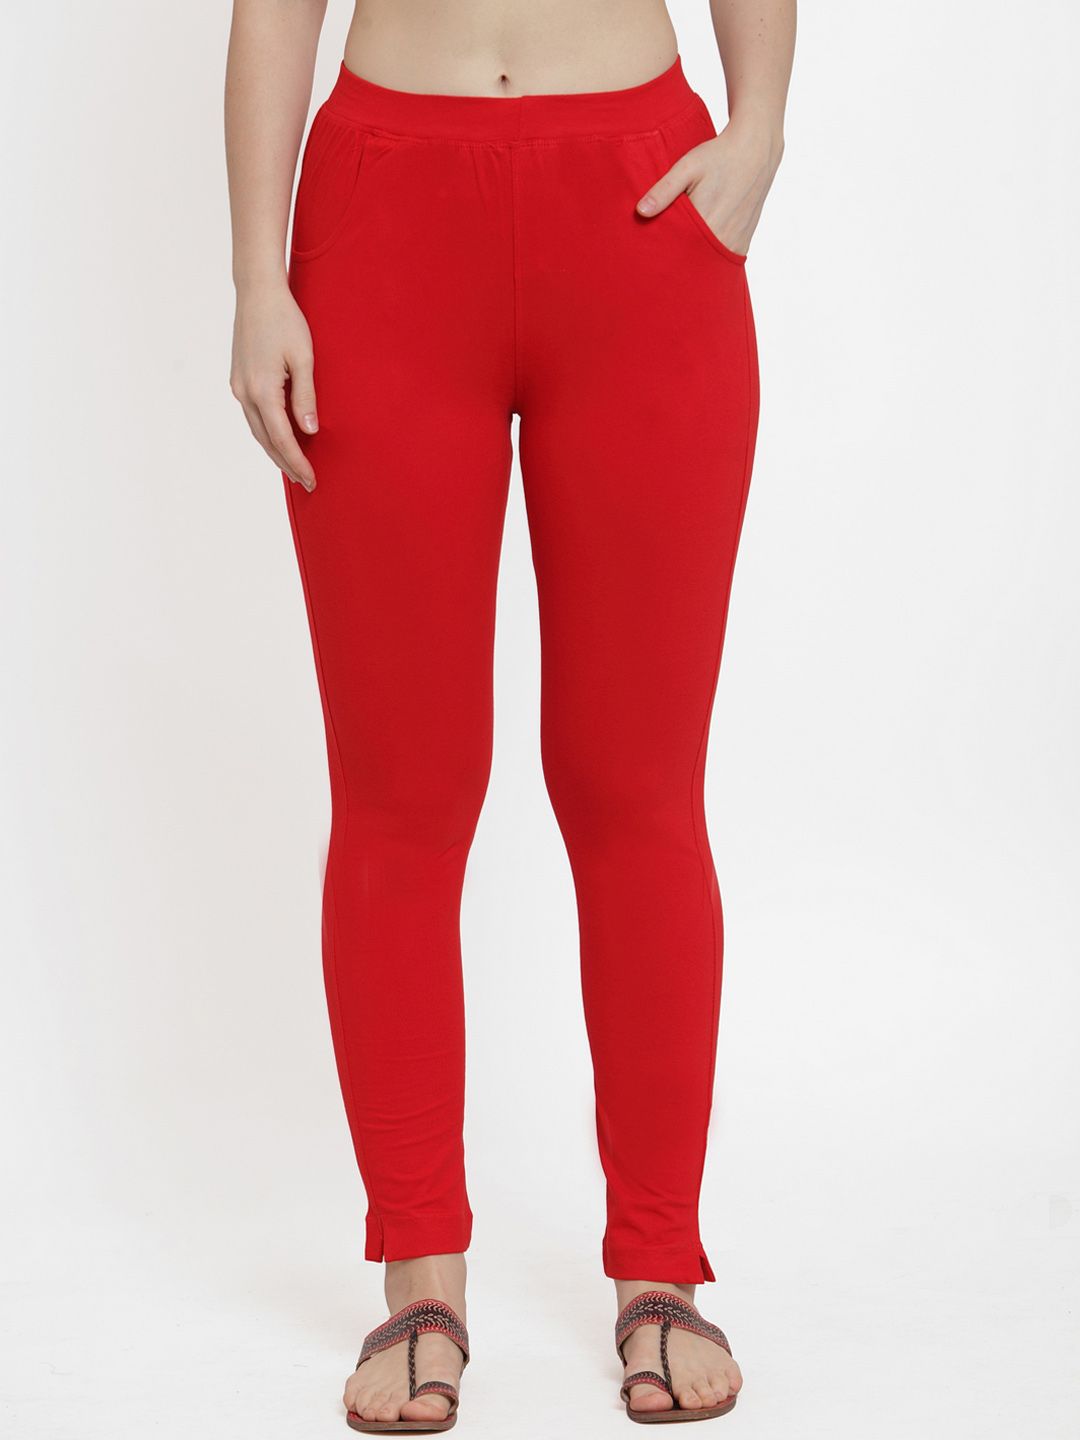 TAG 7 Women Red Solid Ankle-Length Leggings Price in India